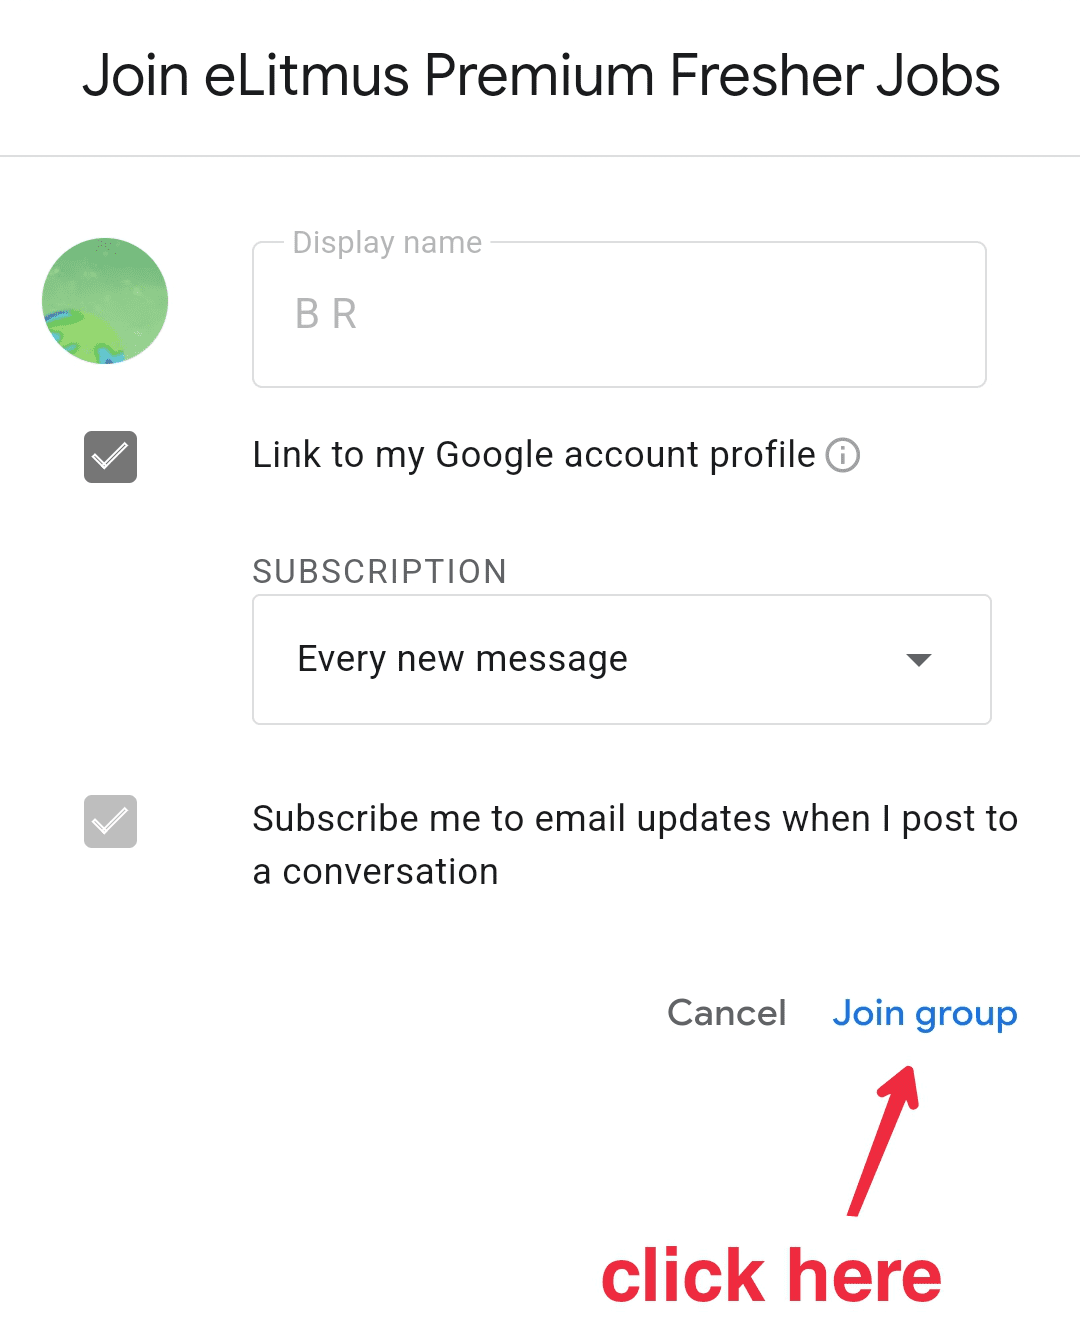 Click on Join group button